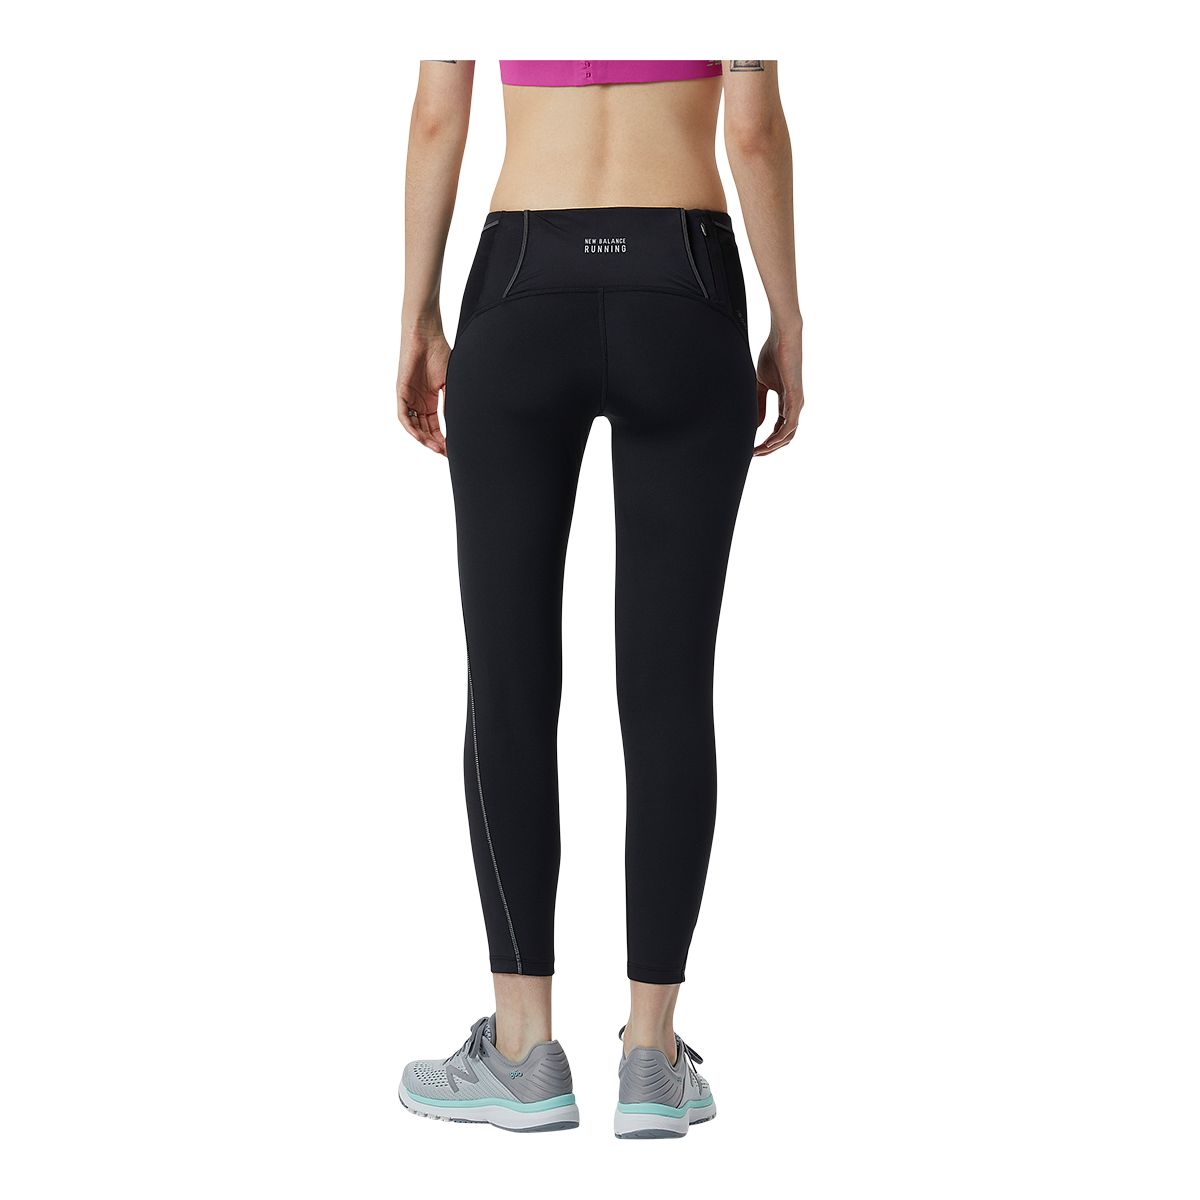 https://media-www.sportchek.ca/product/div-03-softgoods/dpt-70-athletic-clothing/sdpt-02-womens/333622654/nb-w-run-impact-crop-tight-a89e4e73-1fe3-40cd-9be9-7dcd65c155d6-jpgrendition.jpg?imdensity=1&imwidth=1244&impolicy=mZoom